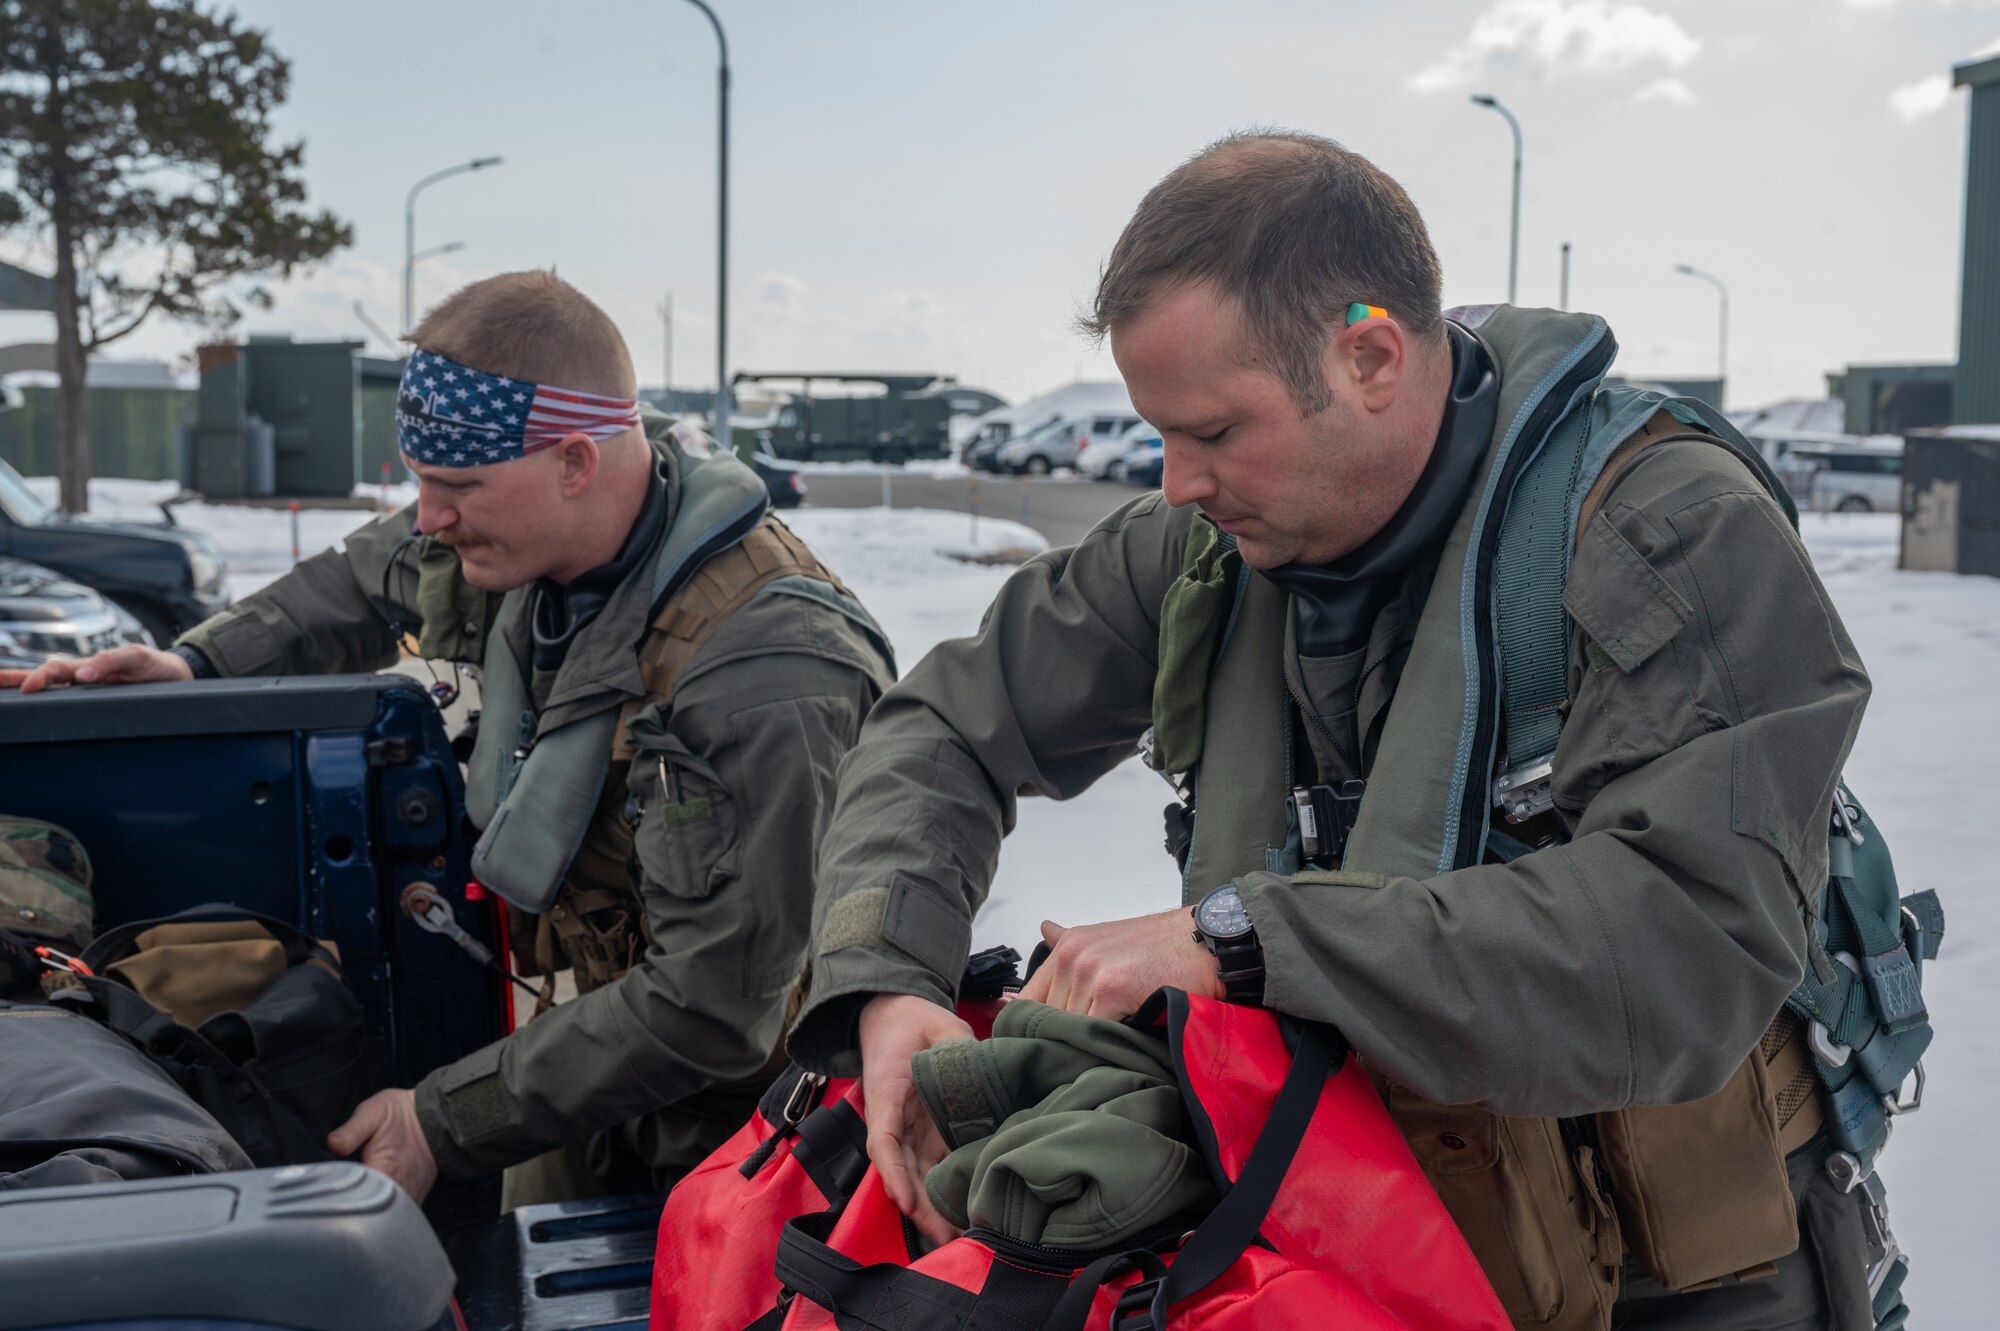 U.S. Air Force Capt. Jacob Stafford, 25th Fighter Squadron A-10C Thunderbolt II pilot, left, and Lt. Col. Justin Ledvina, 25th FS director of operations, pack bags before a flight during the Ninja Mustang training event at Misawa Air Base, Japan, March 7, 2024. The 25th FS organized the training event to develop more lethal Airmen within the 51st Fighter Wing, who can perform their job and execute the mission in an unfamiliar location with limited resources. Ninja Mustang is a training event within the Ninja Draggin series, where 51st FW Airmen relocate to collaborate with units across the Pacific. This initiative enhances the lethality and coordination of units within the pacific theater. (U.S. Air Force photo by Airman 1st Class Chase Verzaal)